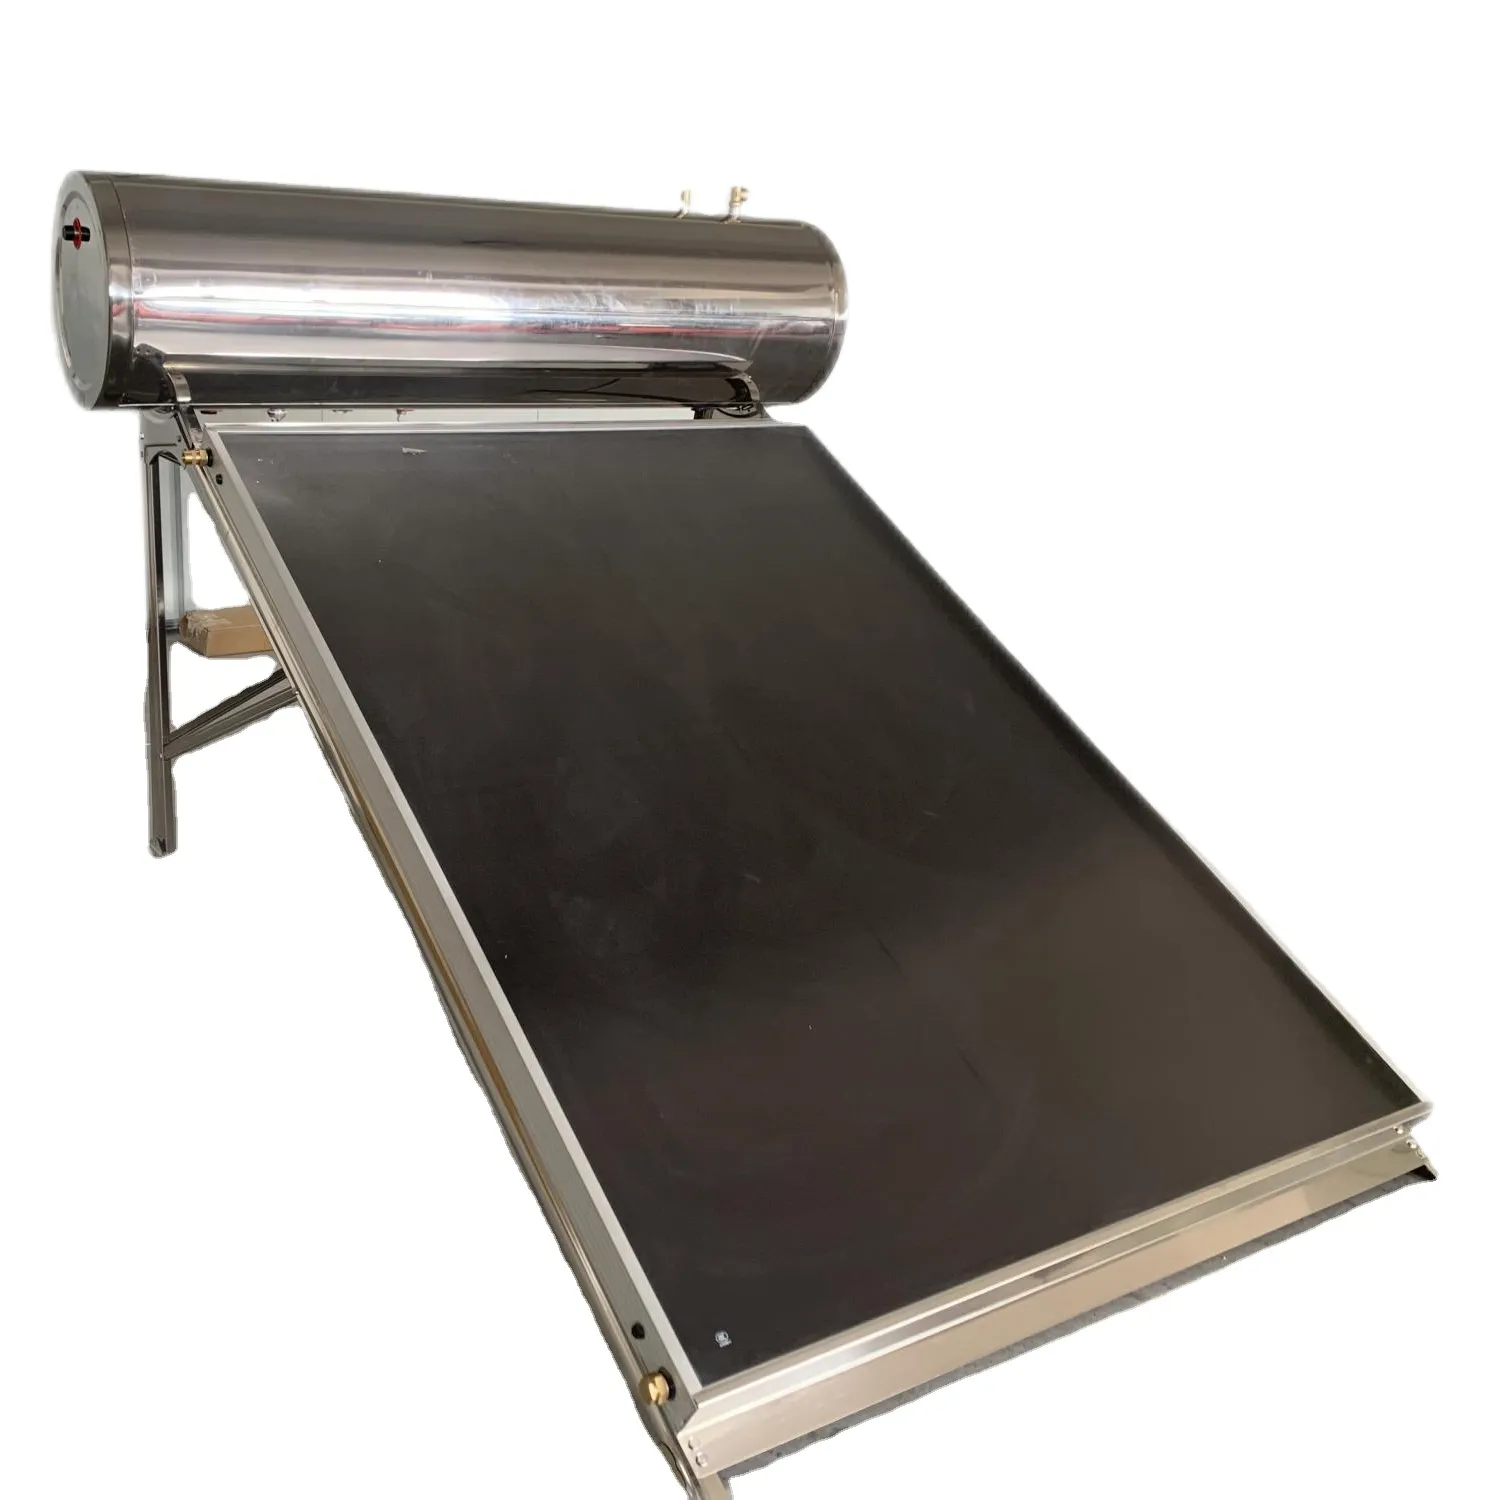 High pressurized flat plate solar panel water heater with high quality